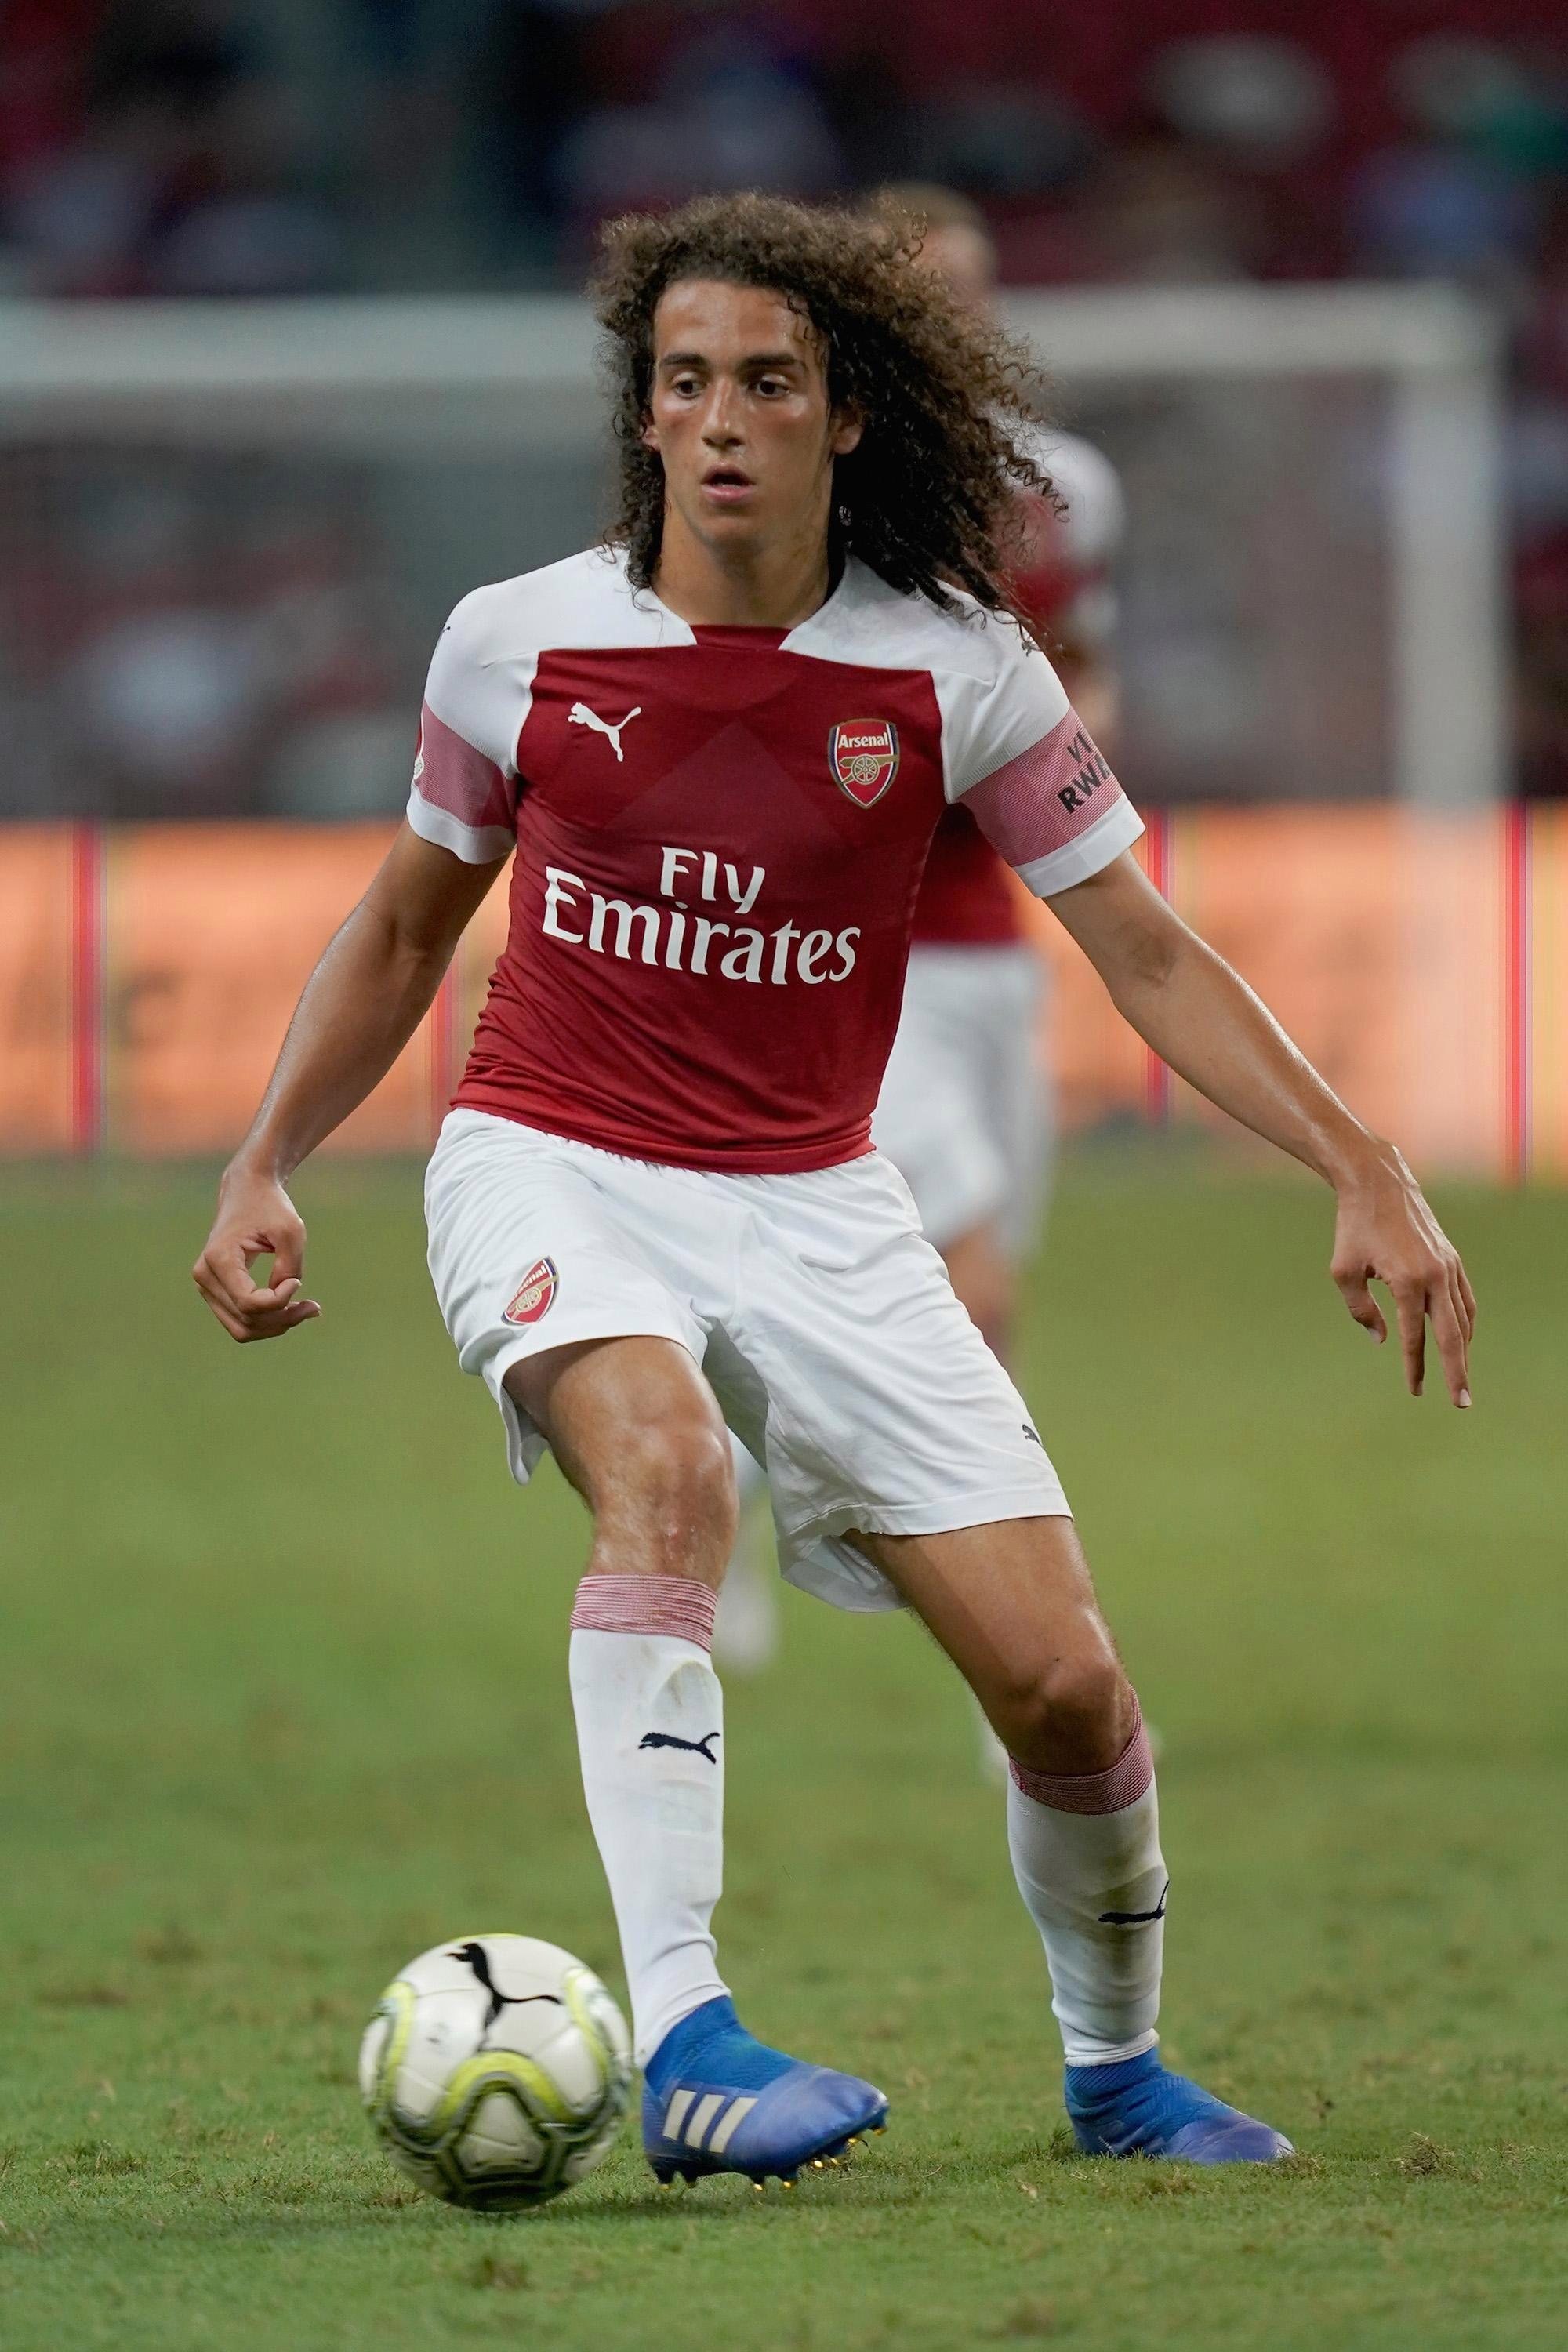 Arsenal fans are going berserk for new teenage ace Matteo Guendouzi